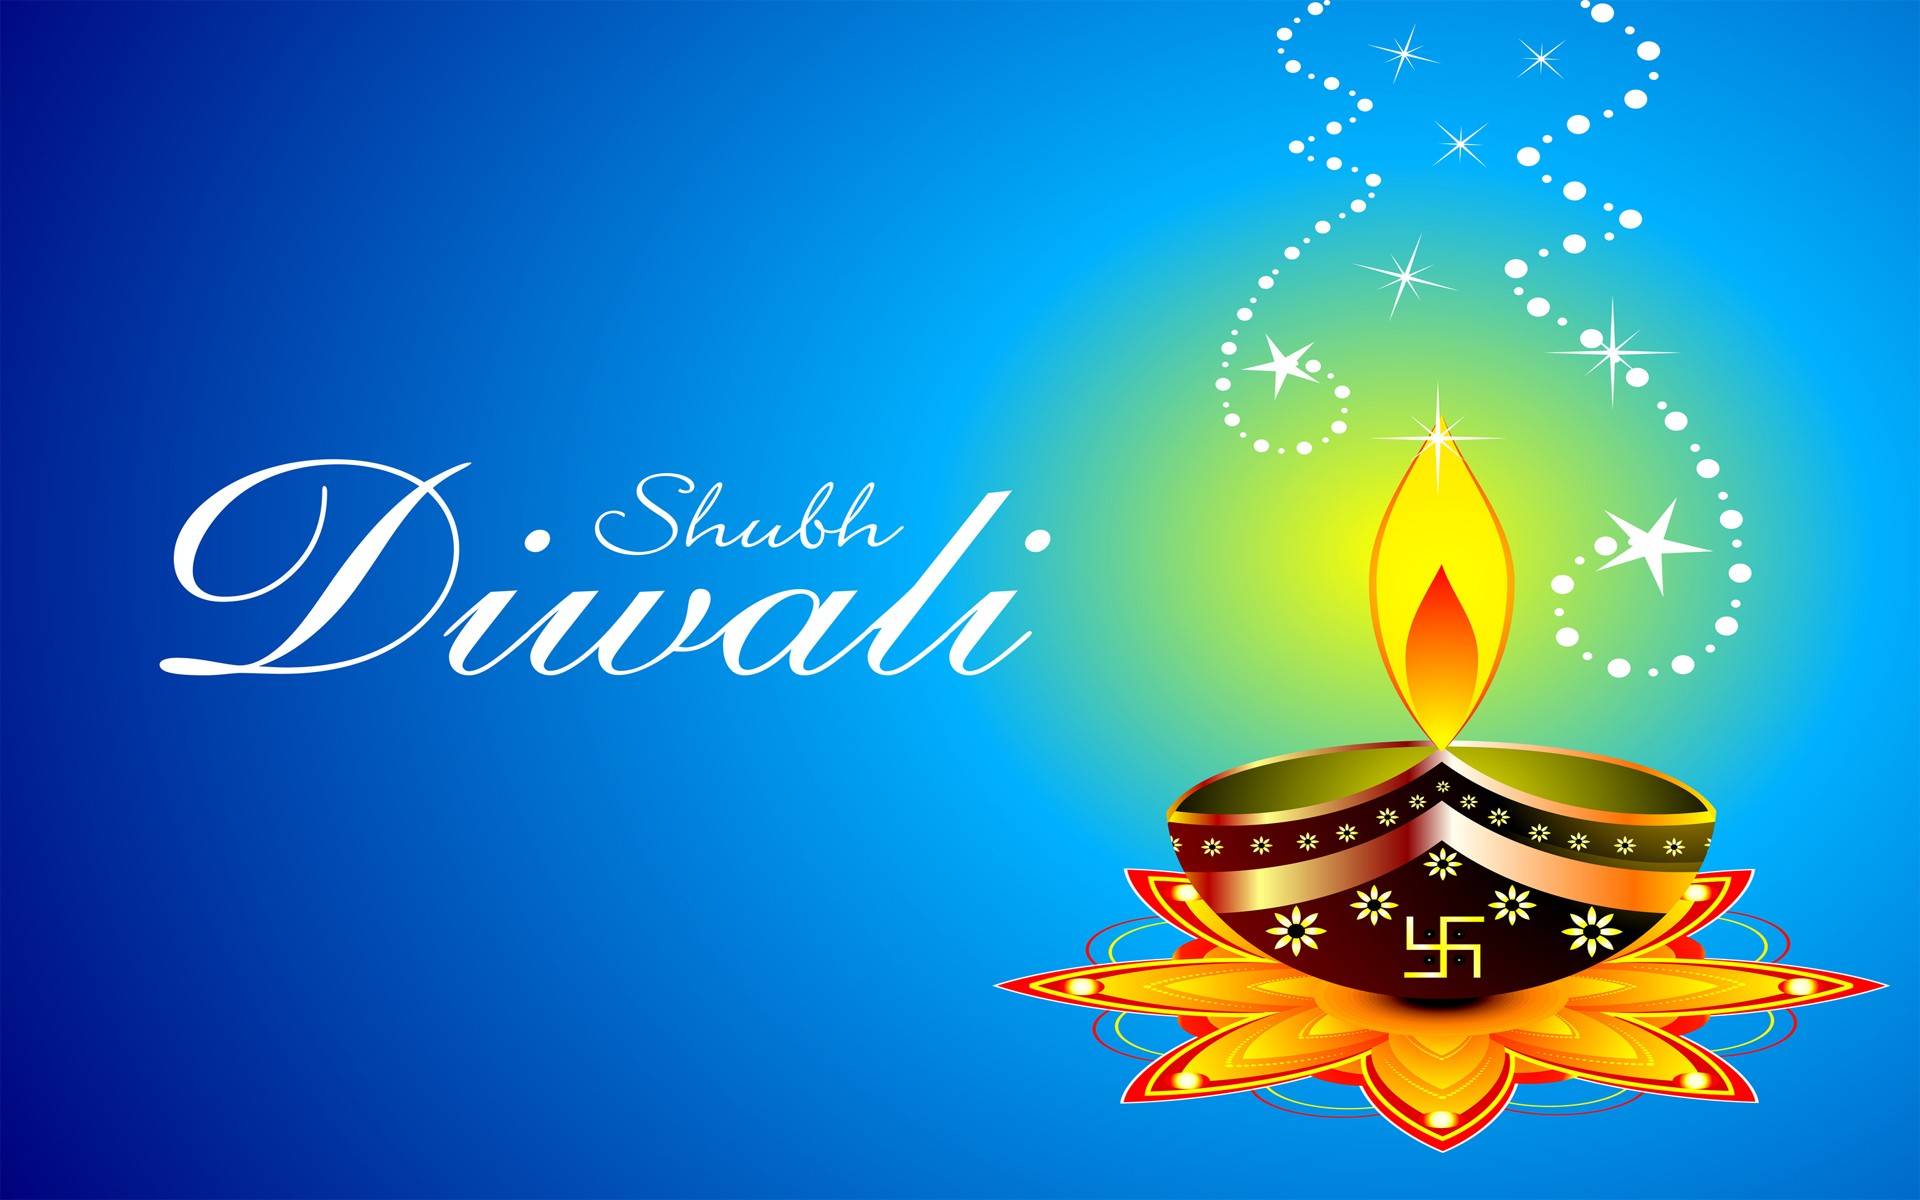 Happy Diwali 2020 Greetings, Wishes, Quotes, And Messages In English HD  Images And Pictures For WhatsApp Status, Instagram Stories, And Facebook  Story